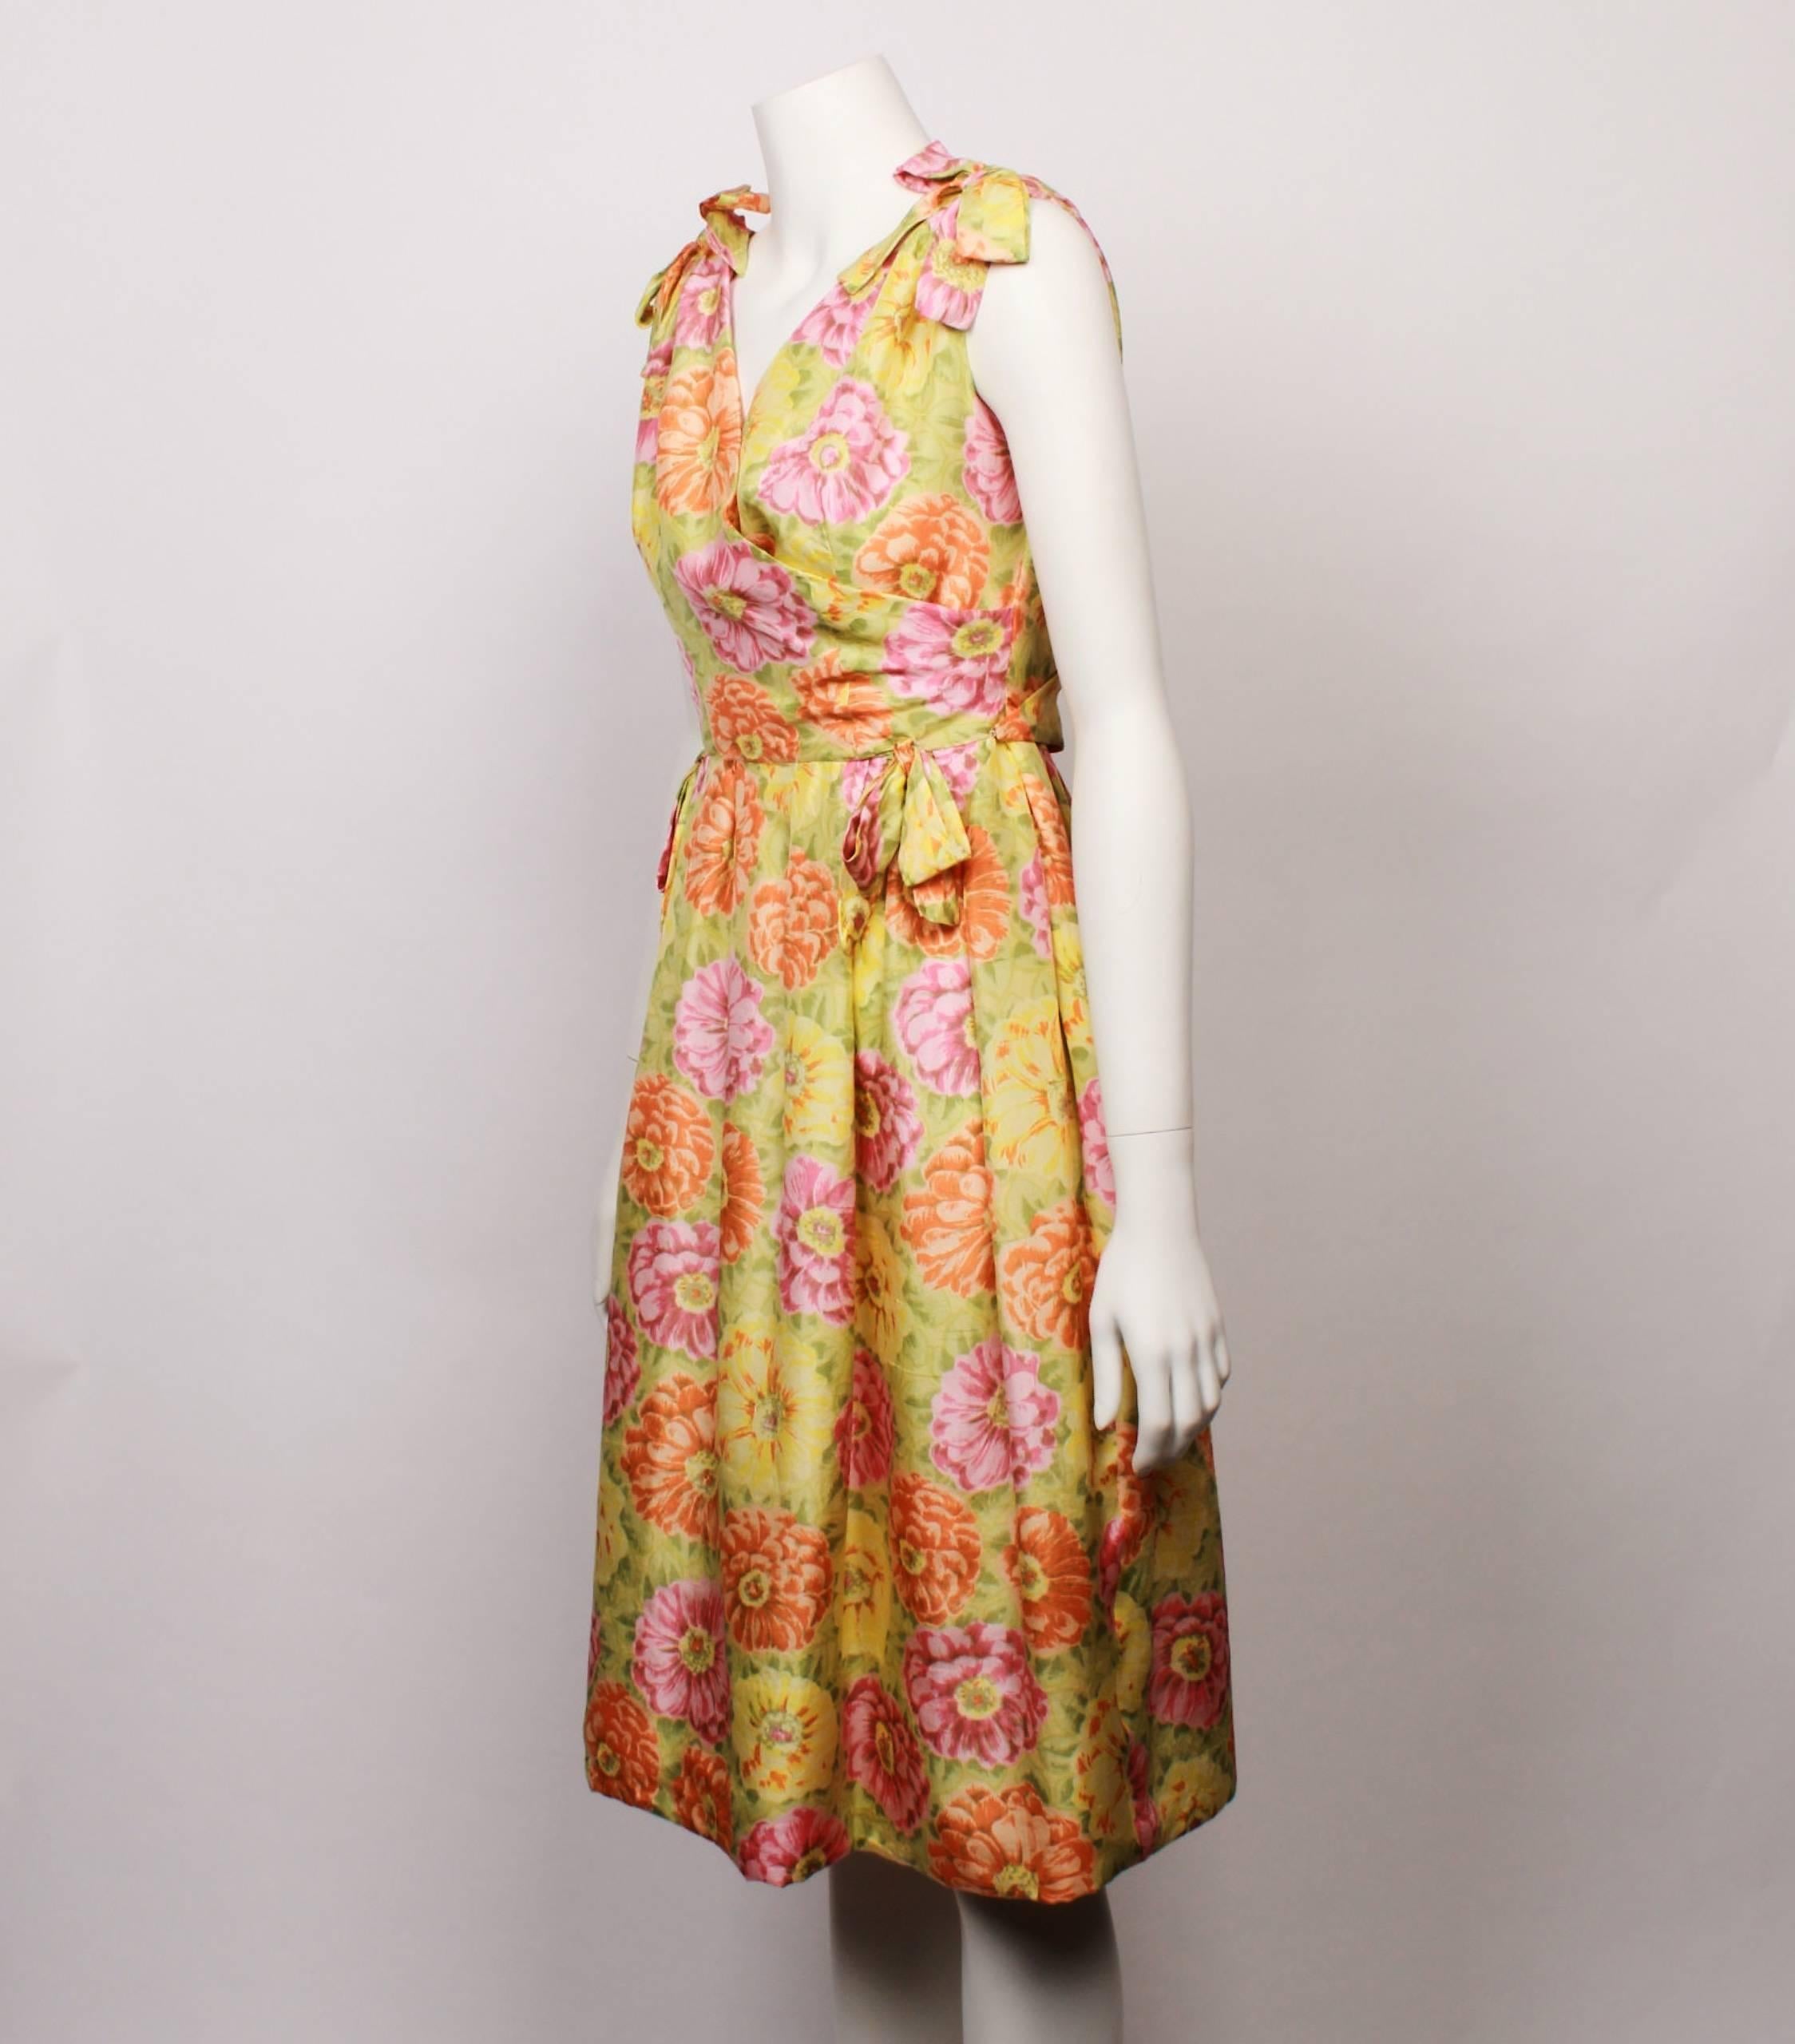 Early 1960s Christian Dior demi– couture new look floral party dress in 100% silk multi coloured floral fabric in hues of fresh citrus green, yellow, orange and pink. Cross over front and back bodice with a slightly gathered skirt. 
Features